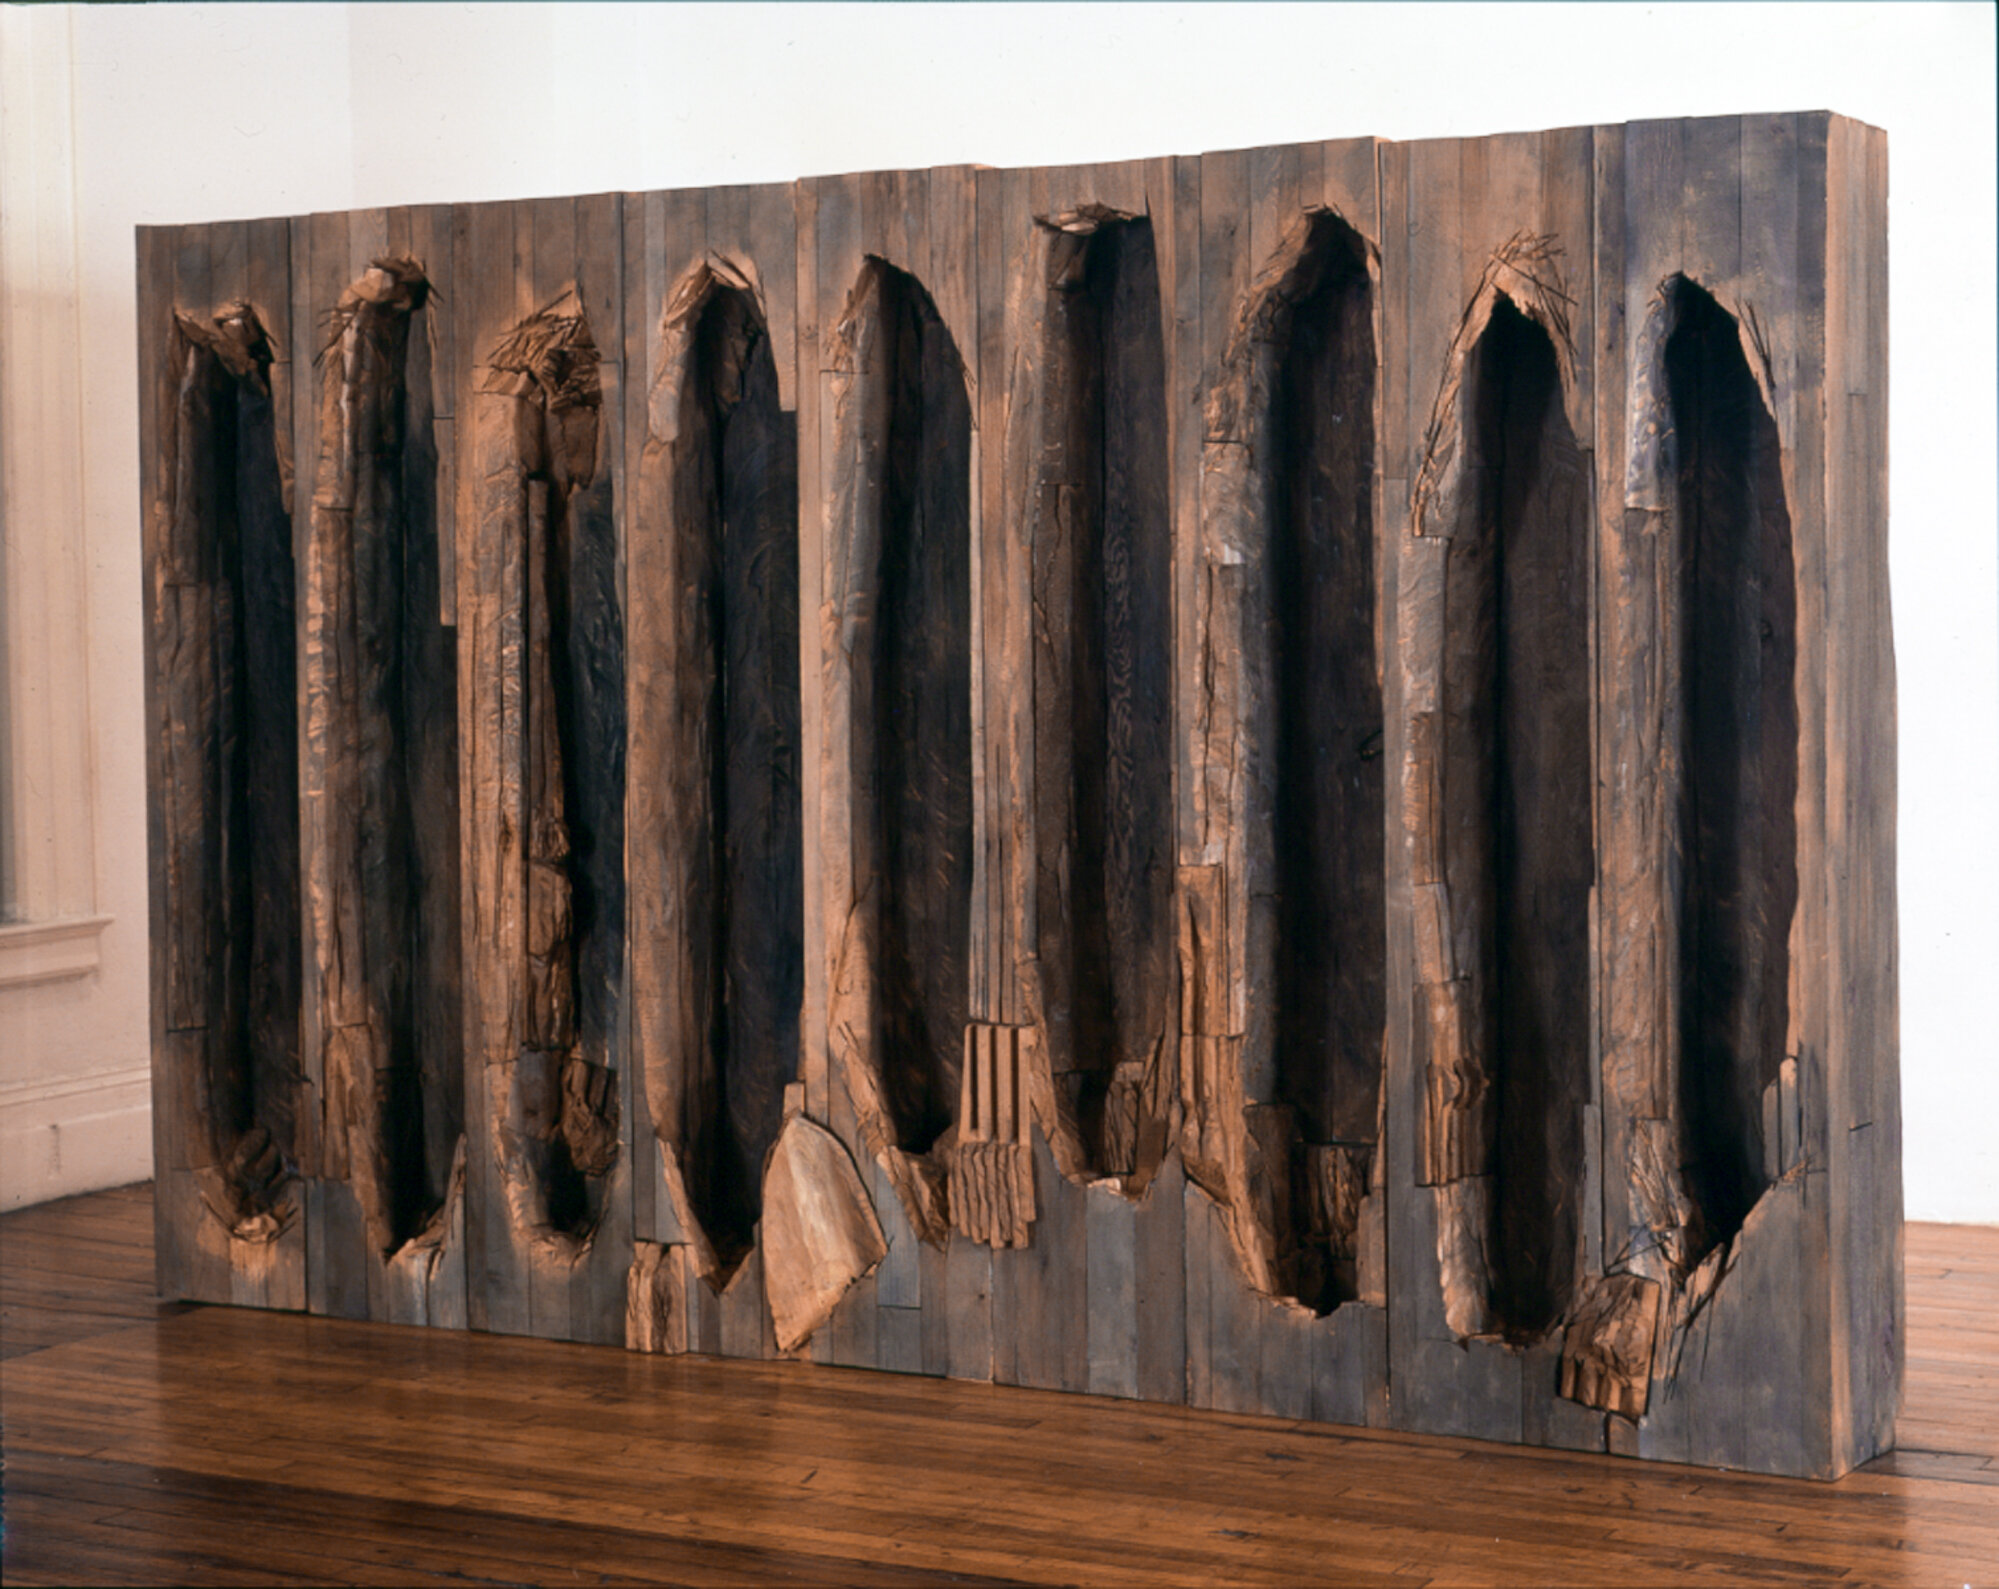       Umarłeś (You Went and Died) , 1987-88 Cedar and stain 78 x 128 x 12 in. 